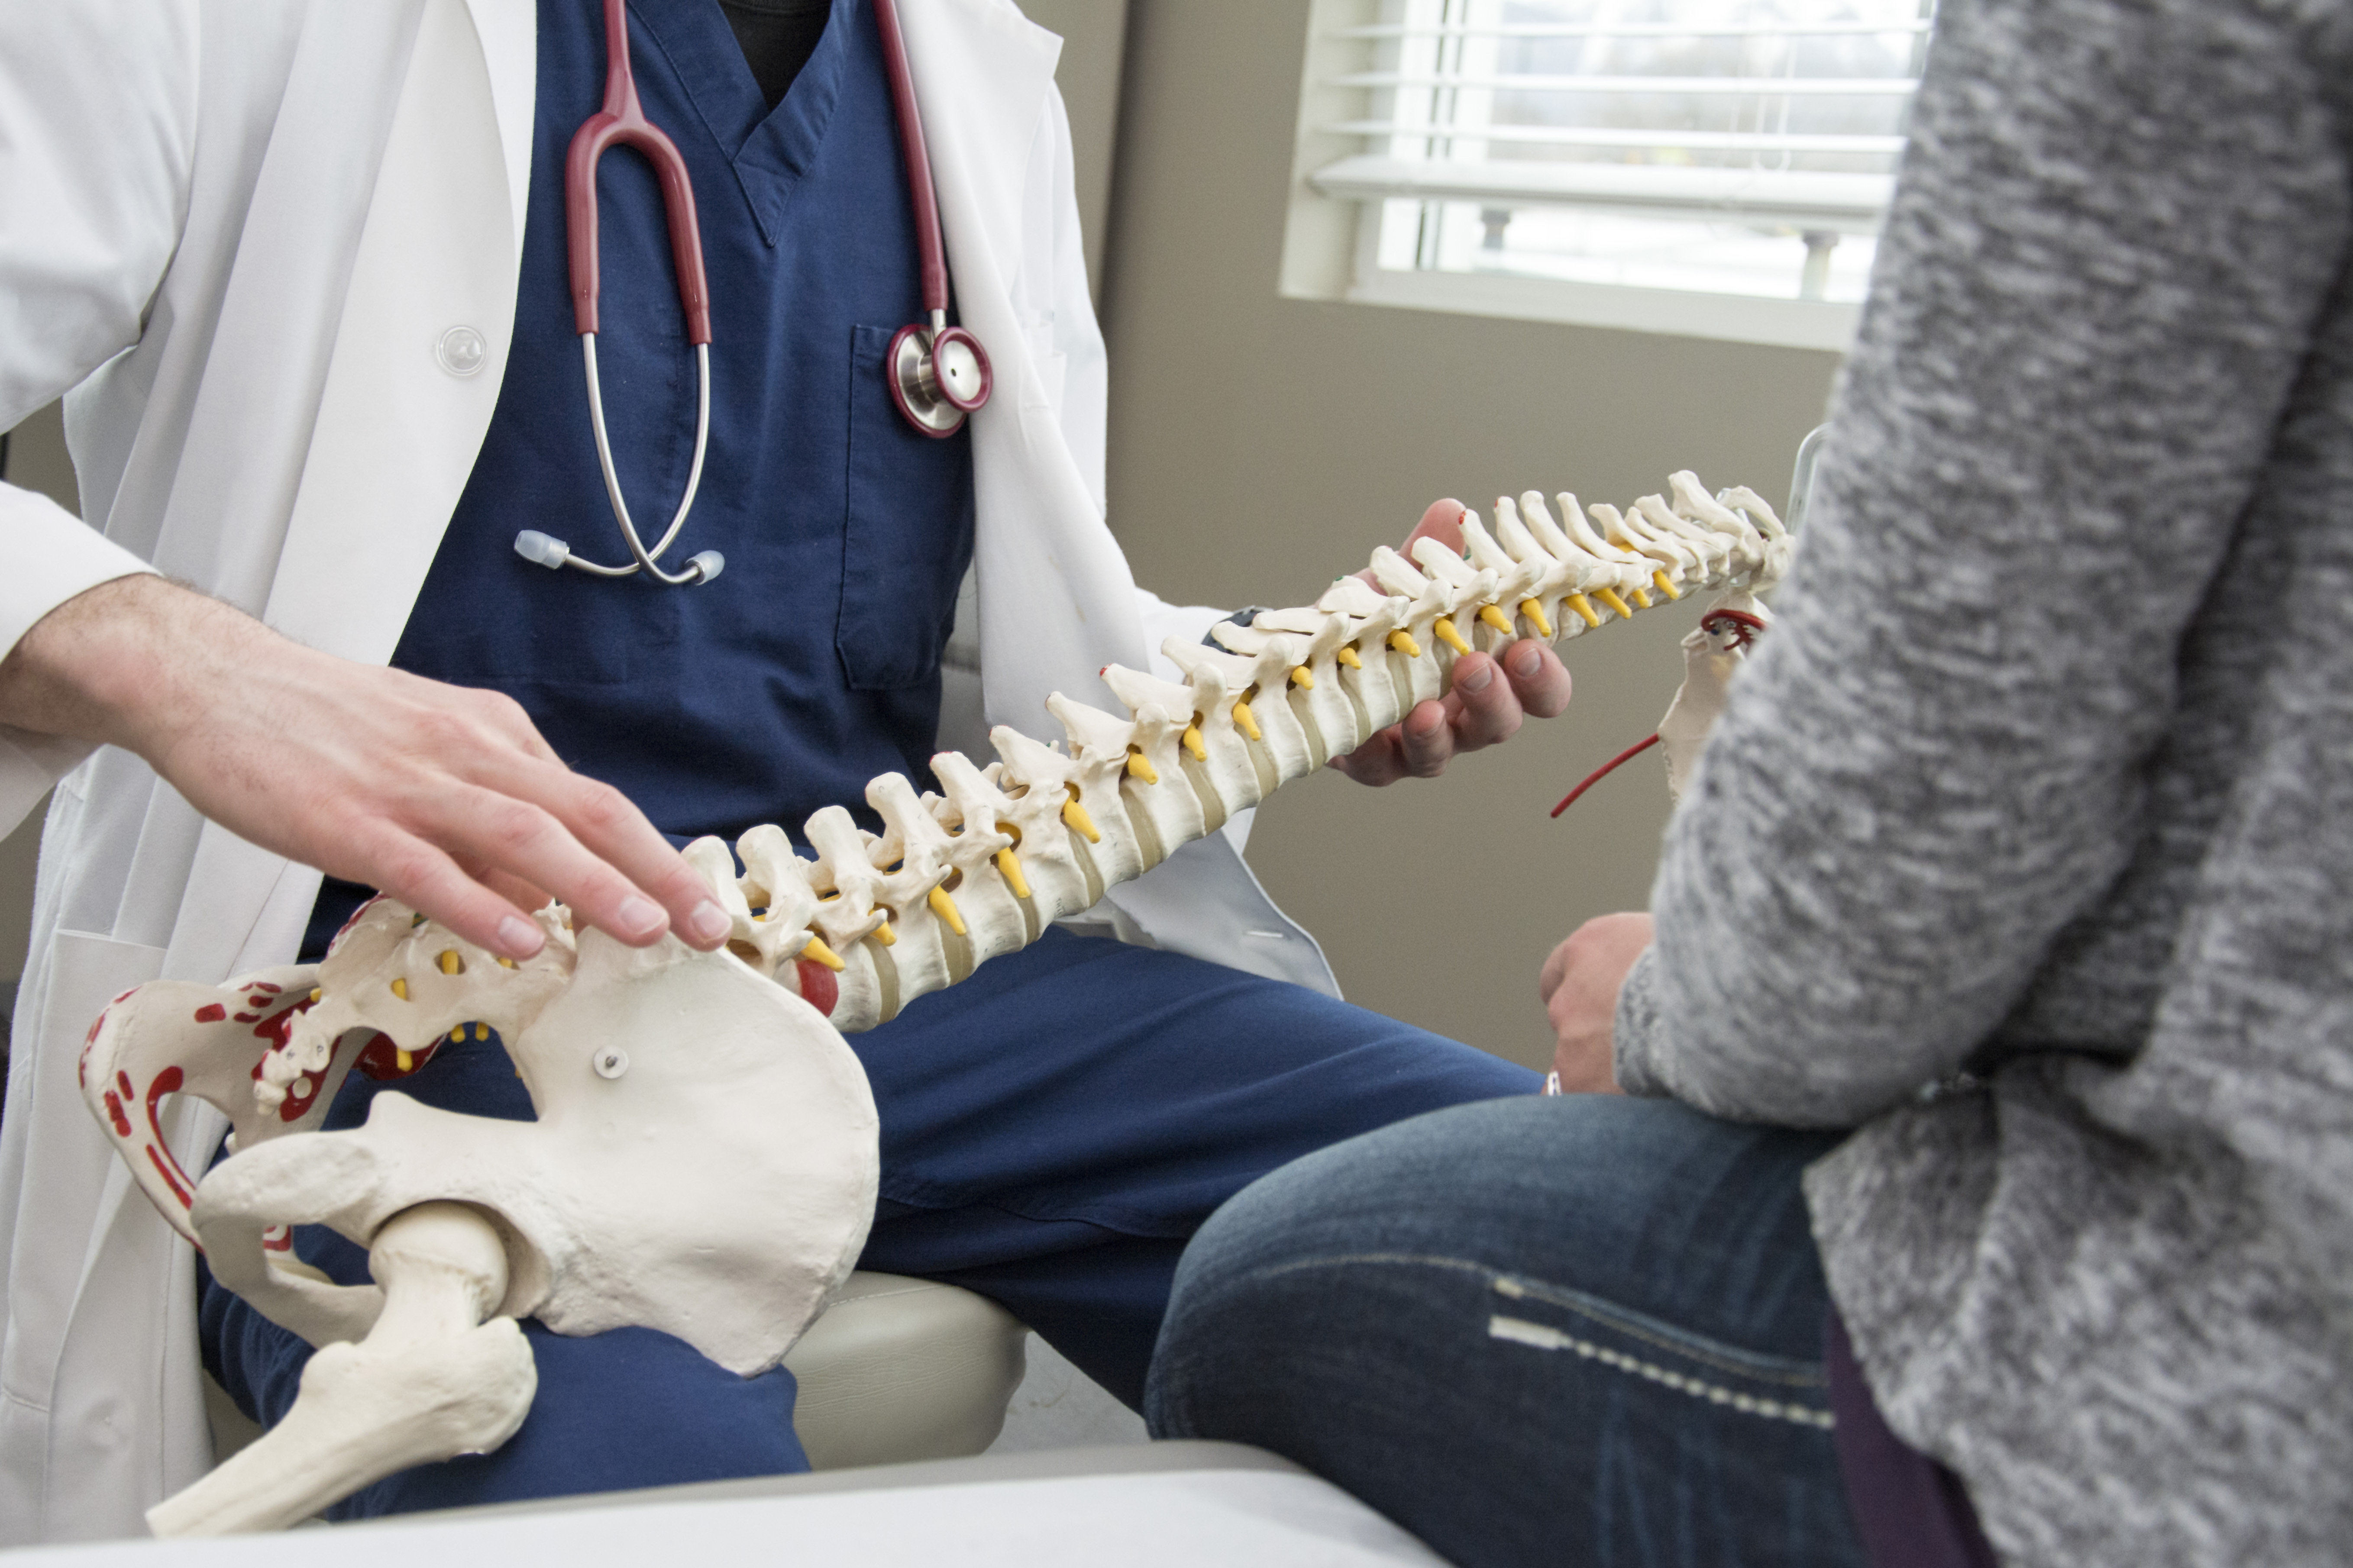 Chiropractor holds model of human spine.